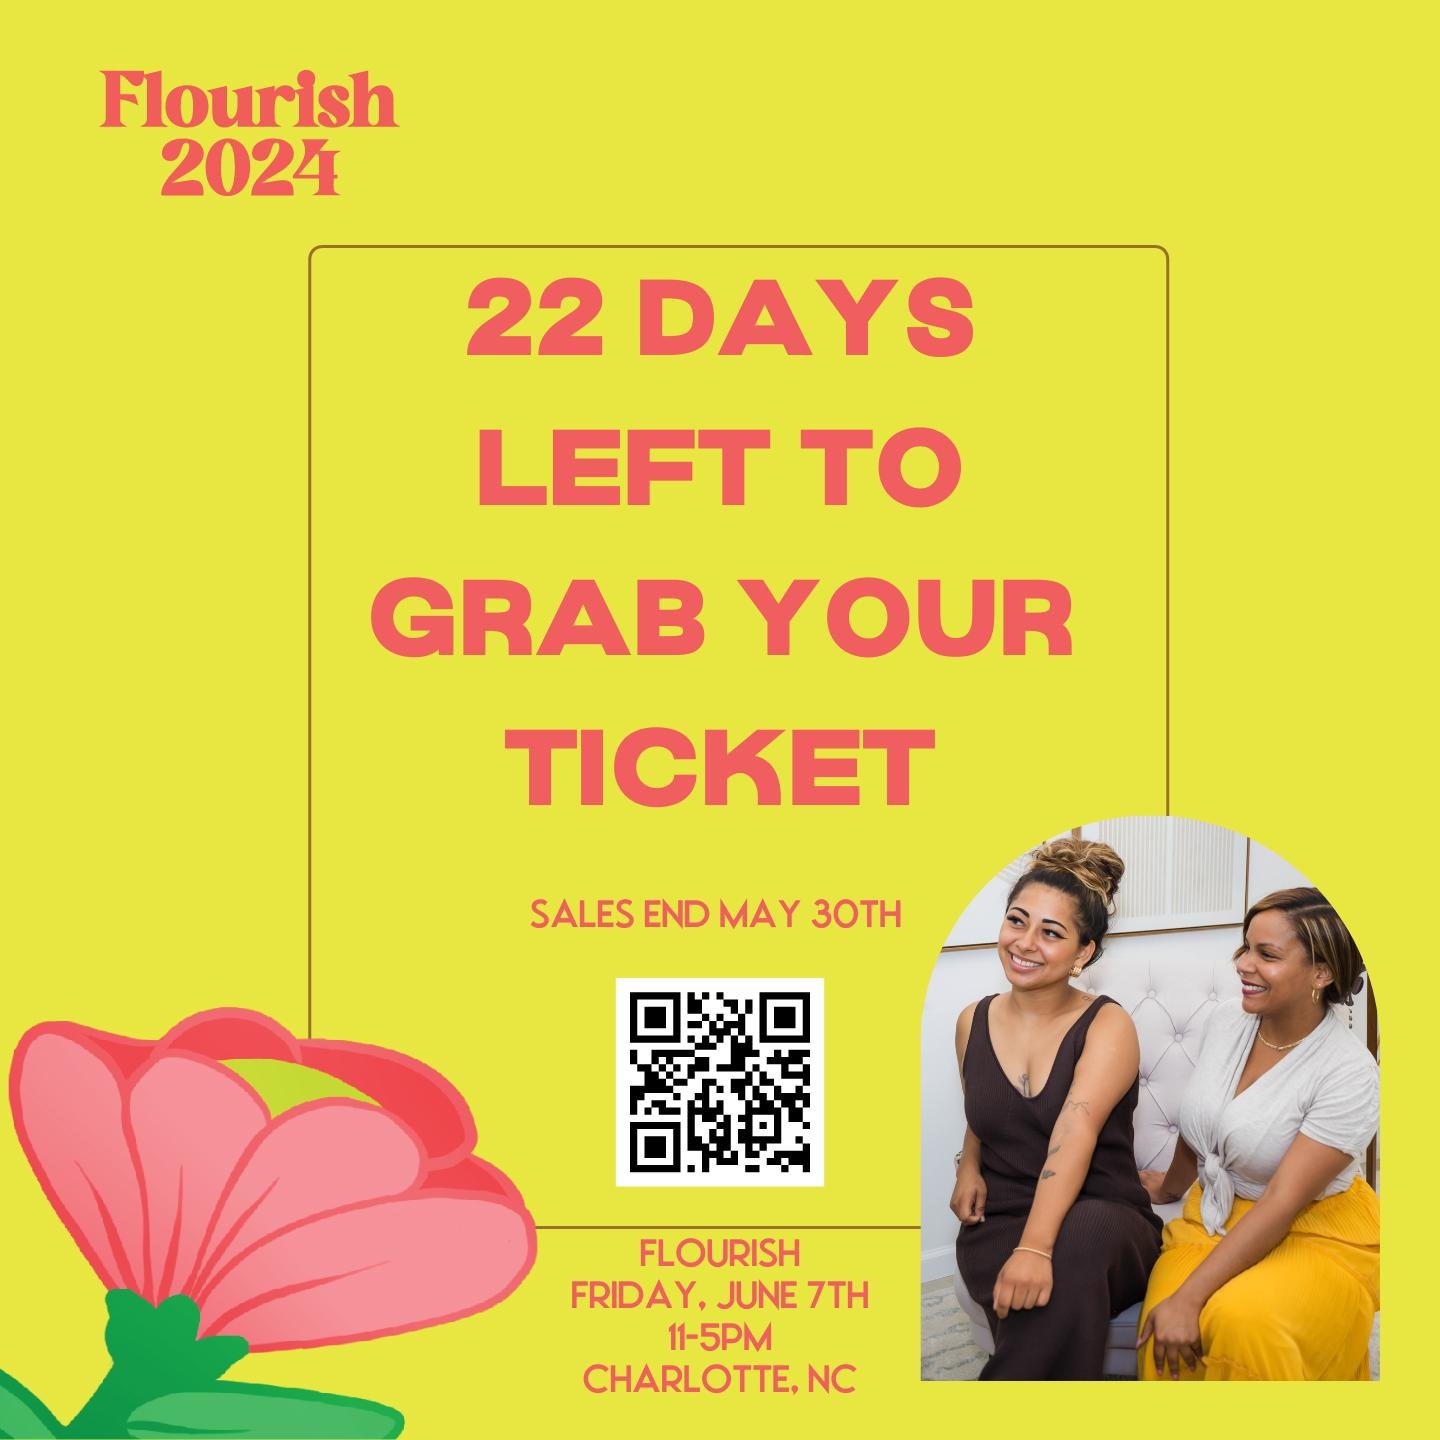 Time's ticking! Score your tickets for Flourish before May 30th 🎟️ Use code BOSS for a sweet deal. Can't wait to see you June 7th in the Queen City! 

Psst! Here's a tip: Vendor spots and sponsorships are still up for grabs. A great chance to shine!